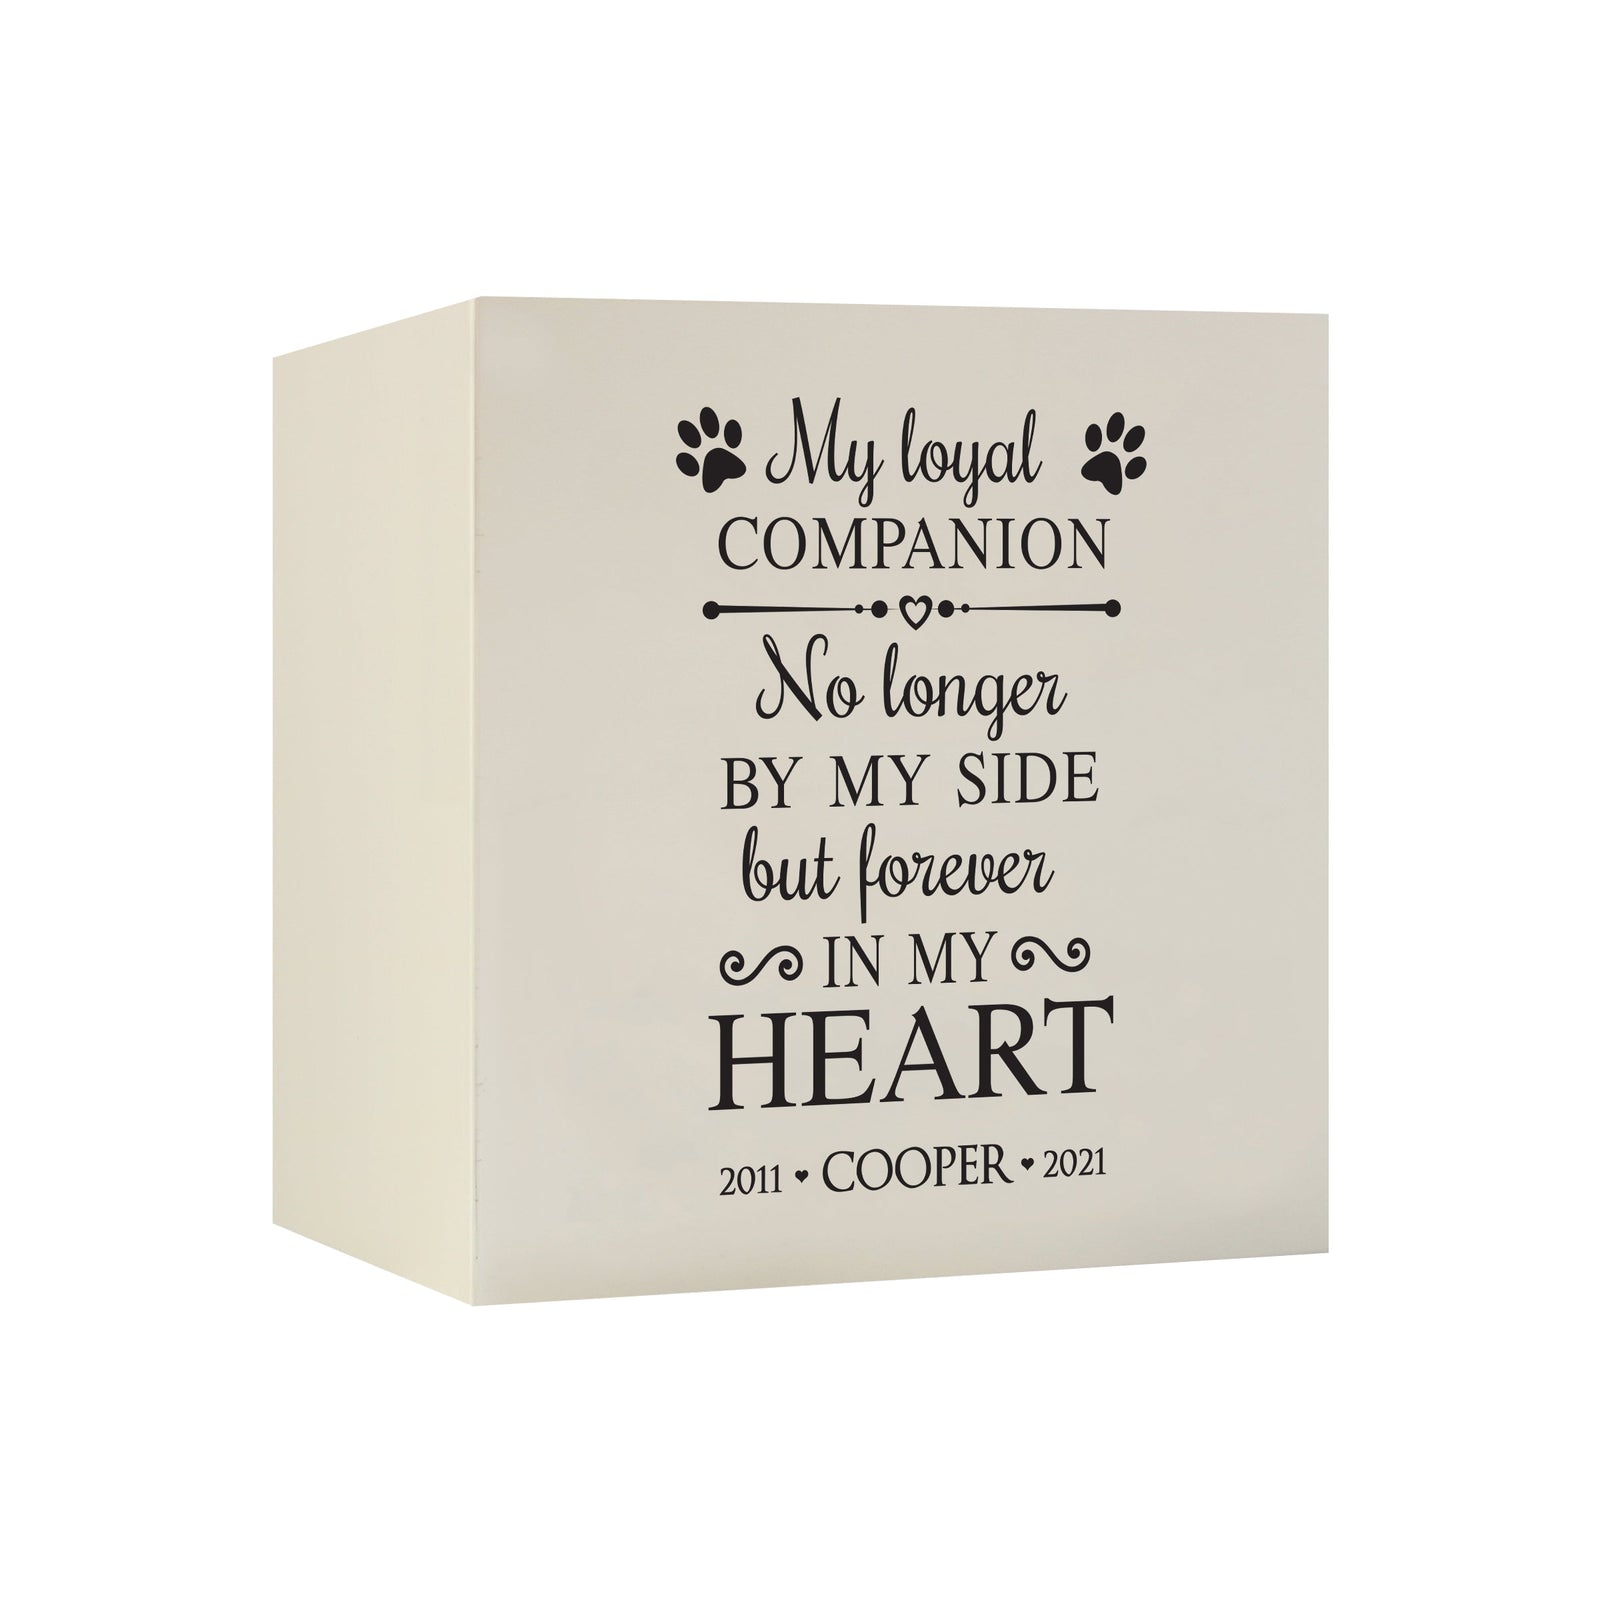 Pet Memorial Shadow Box Cremation Urn for Dog or Cat - My Loyal Companion